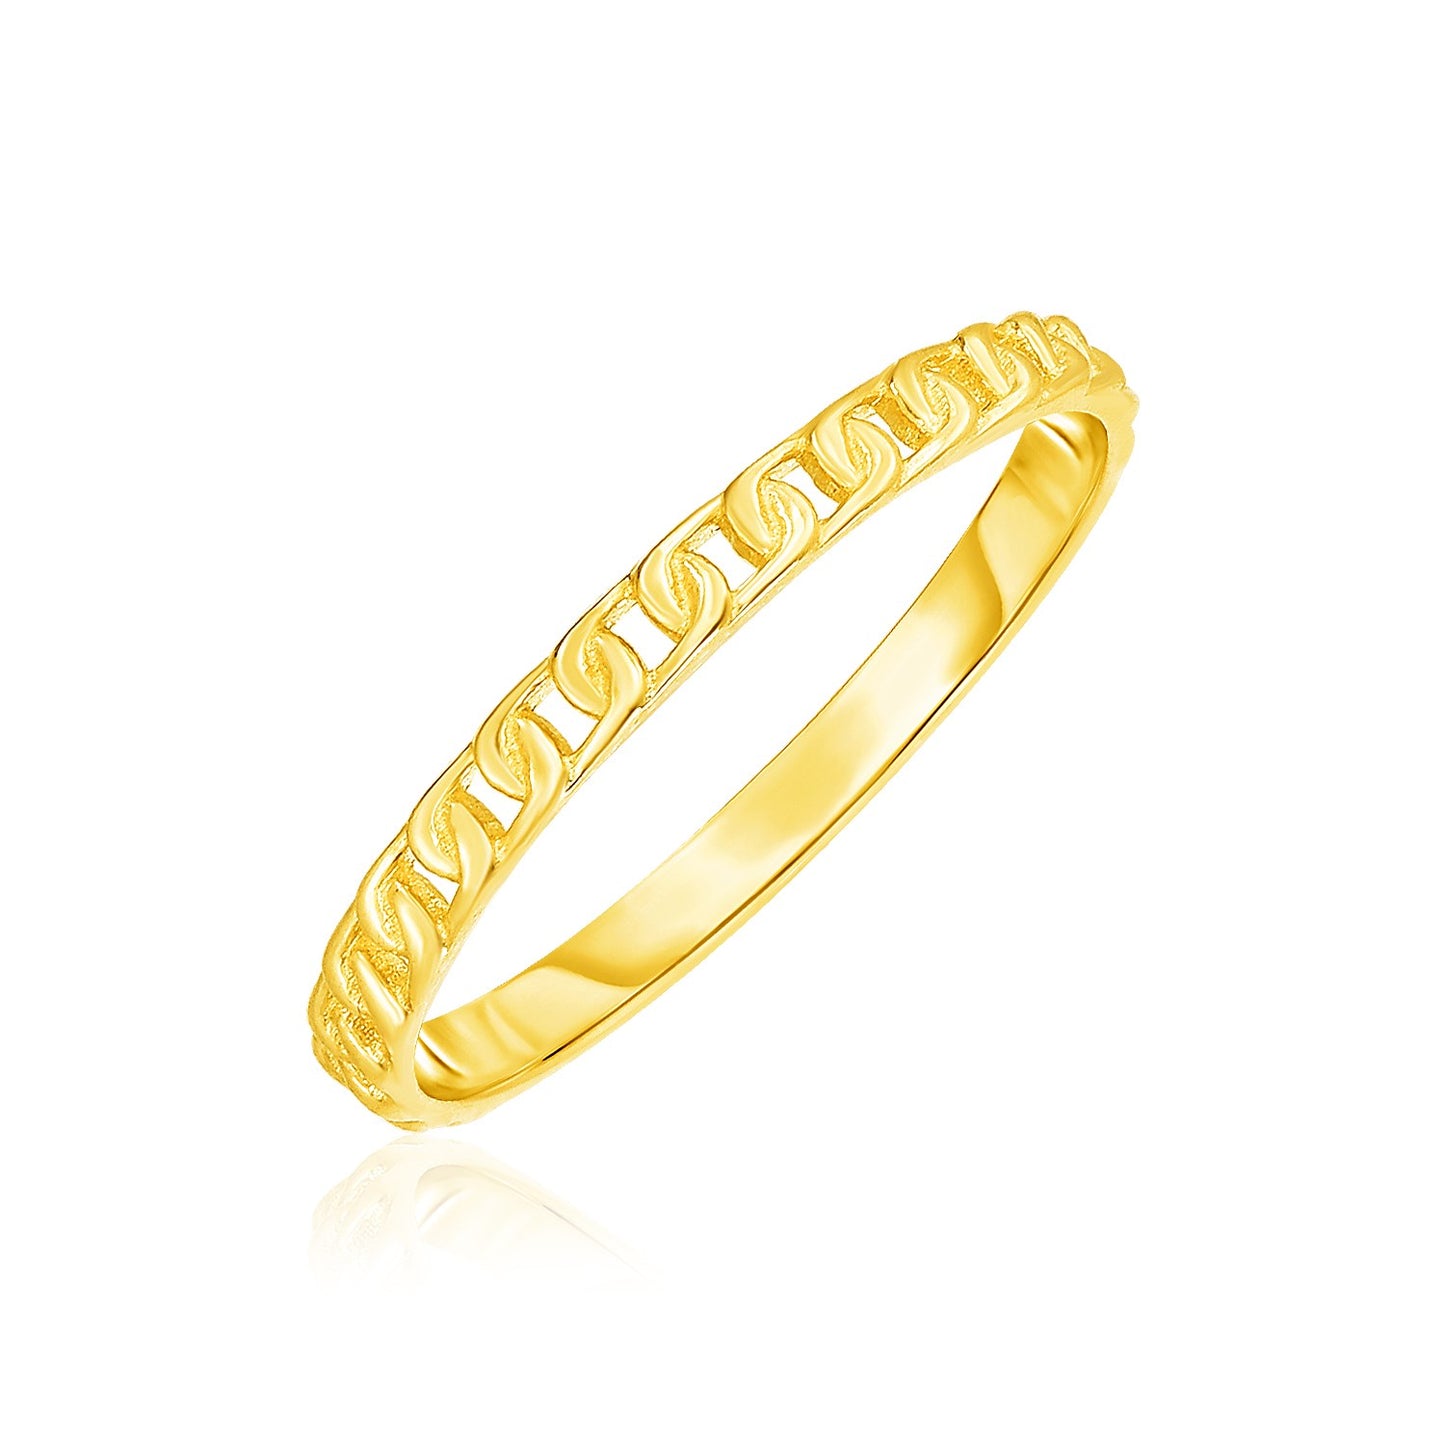 14k Yellow Gold Ring with Bead Texture